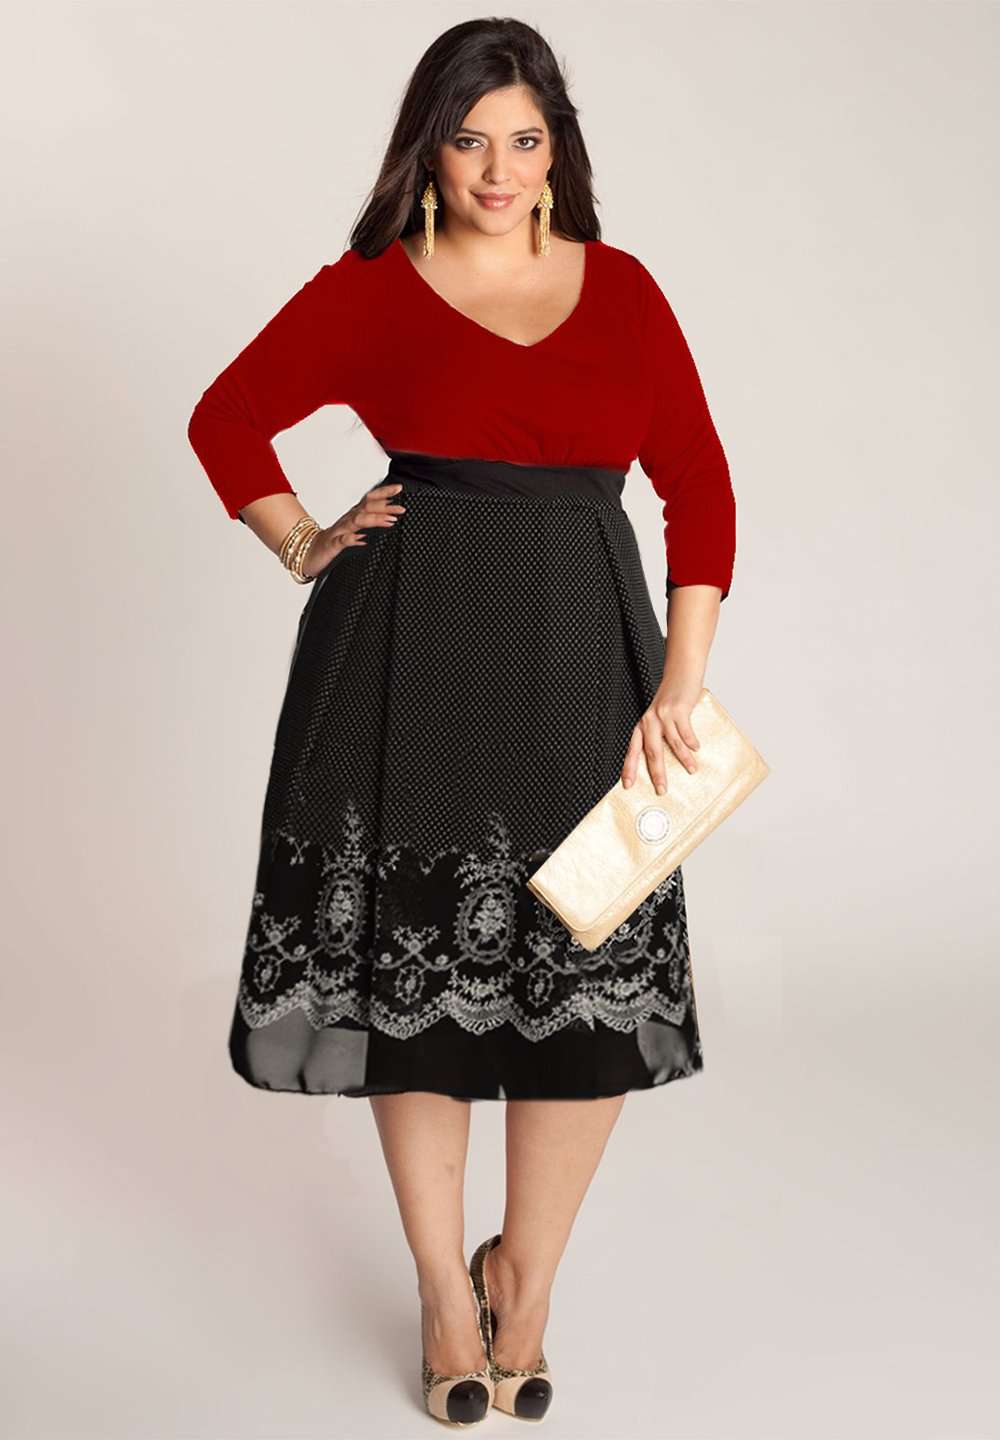 Black and red plus size dress |